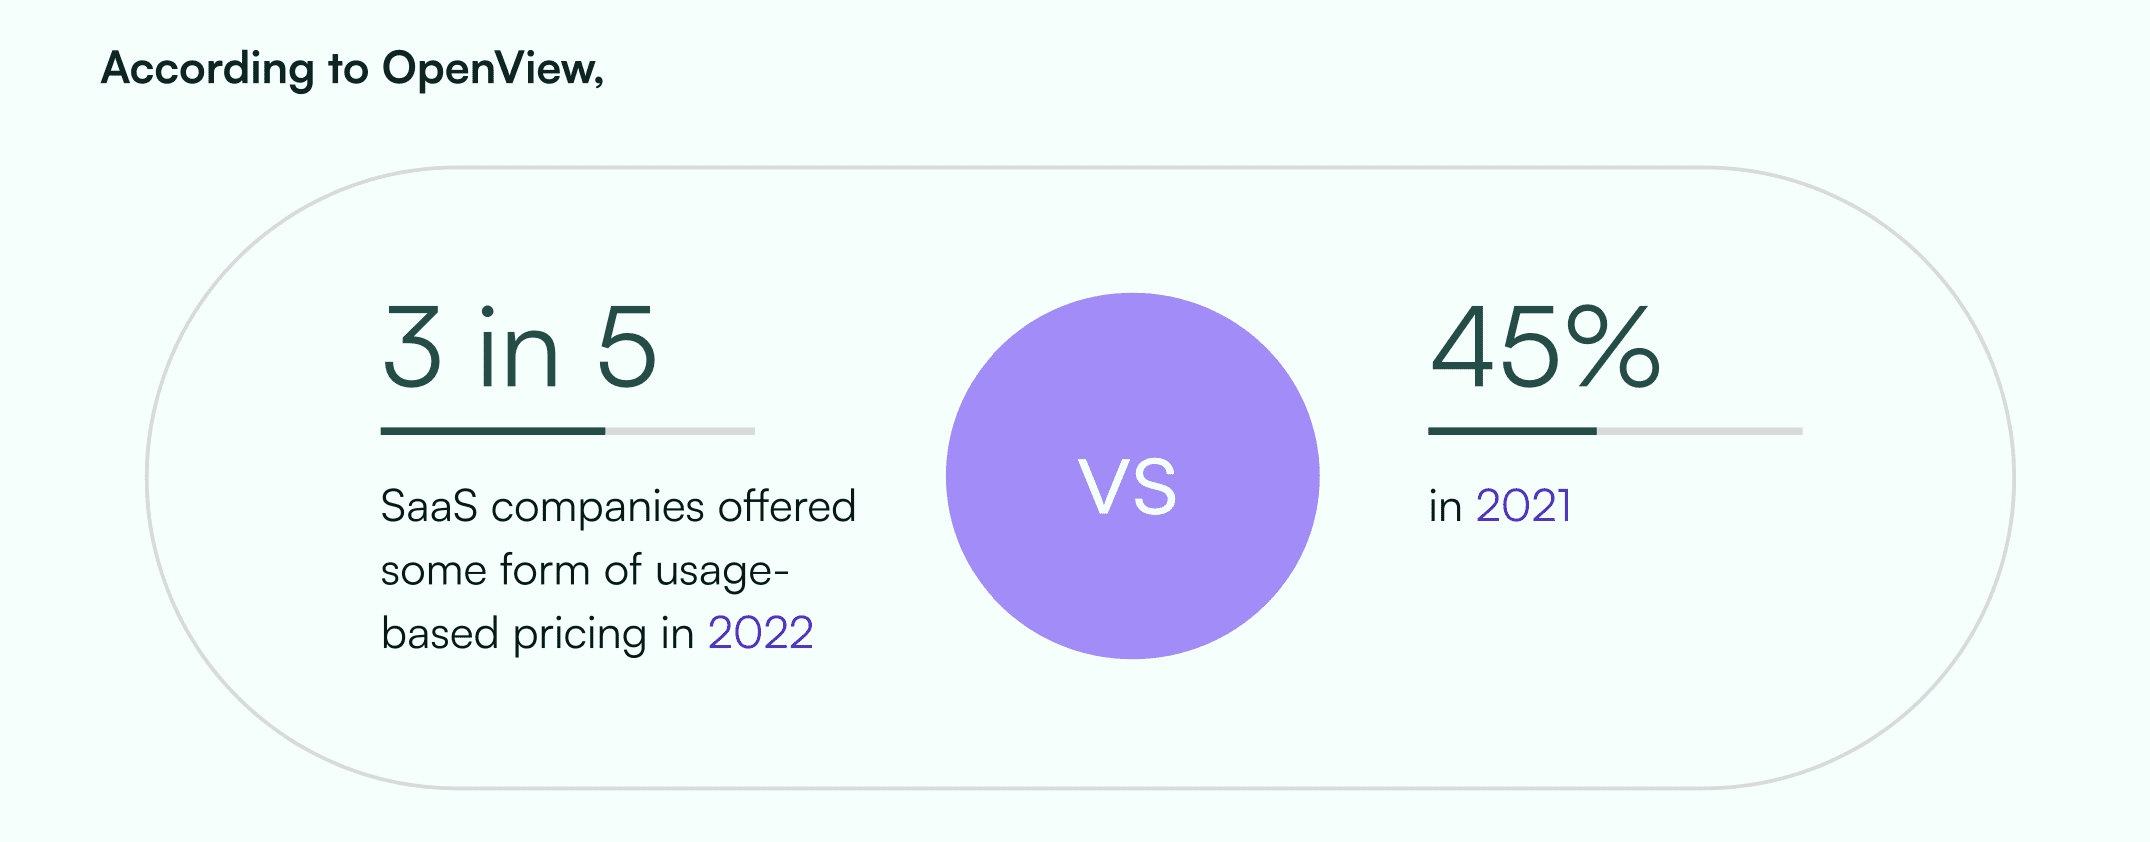 Three in five SaaS business implement some form of usage-based pricing today versus 45% in 2021